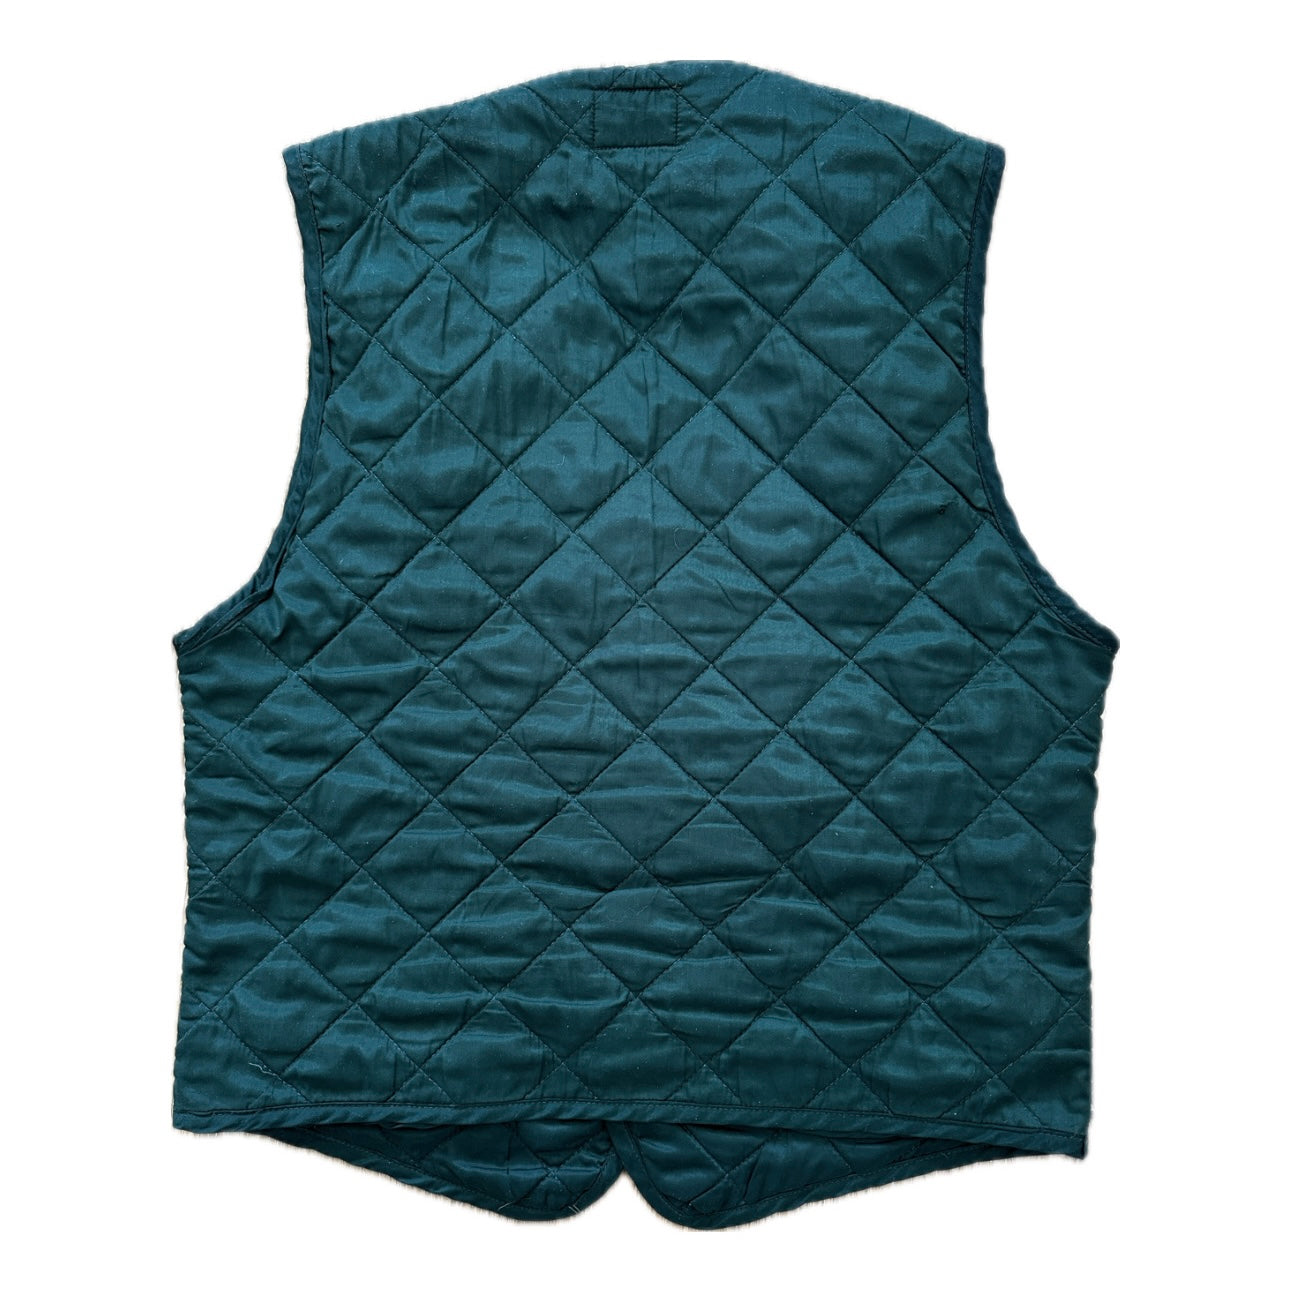 C.P. Company Vintage 1990 Quilted Vest - 46 / M - Made in Italy